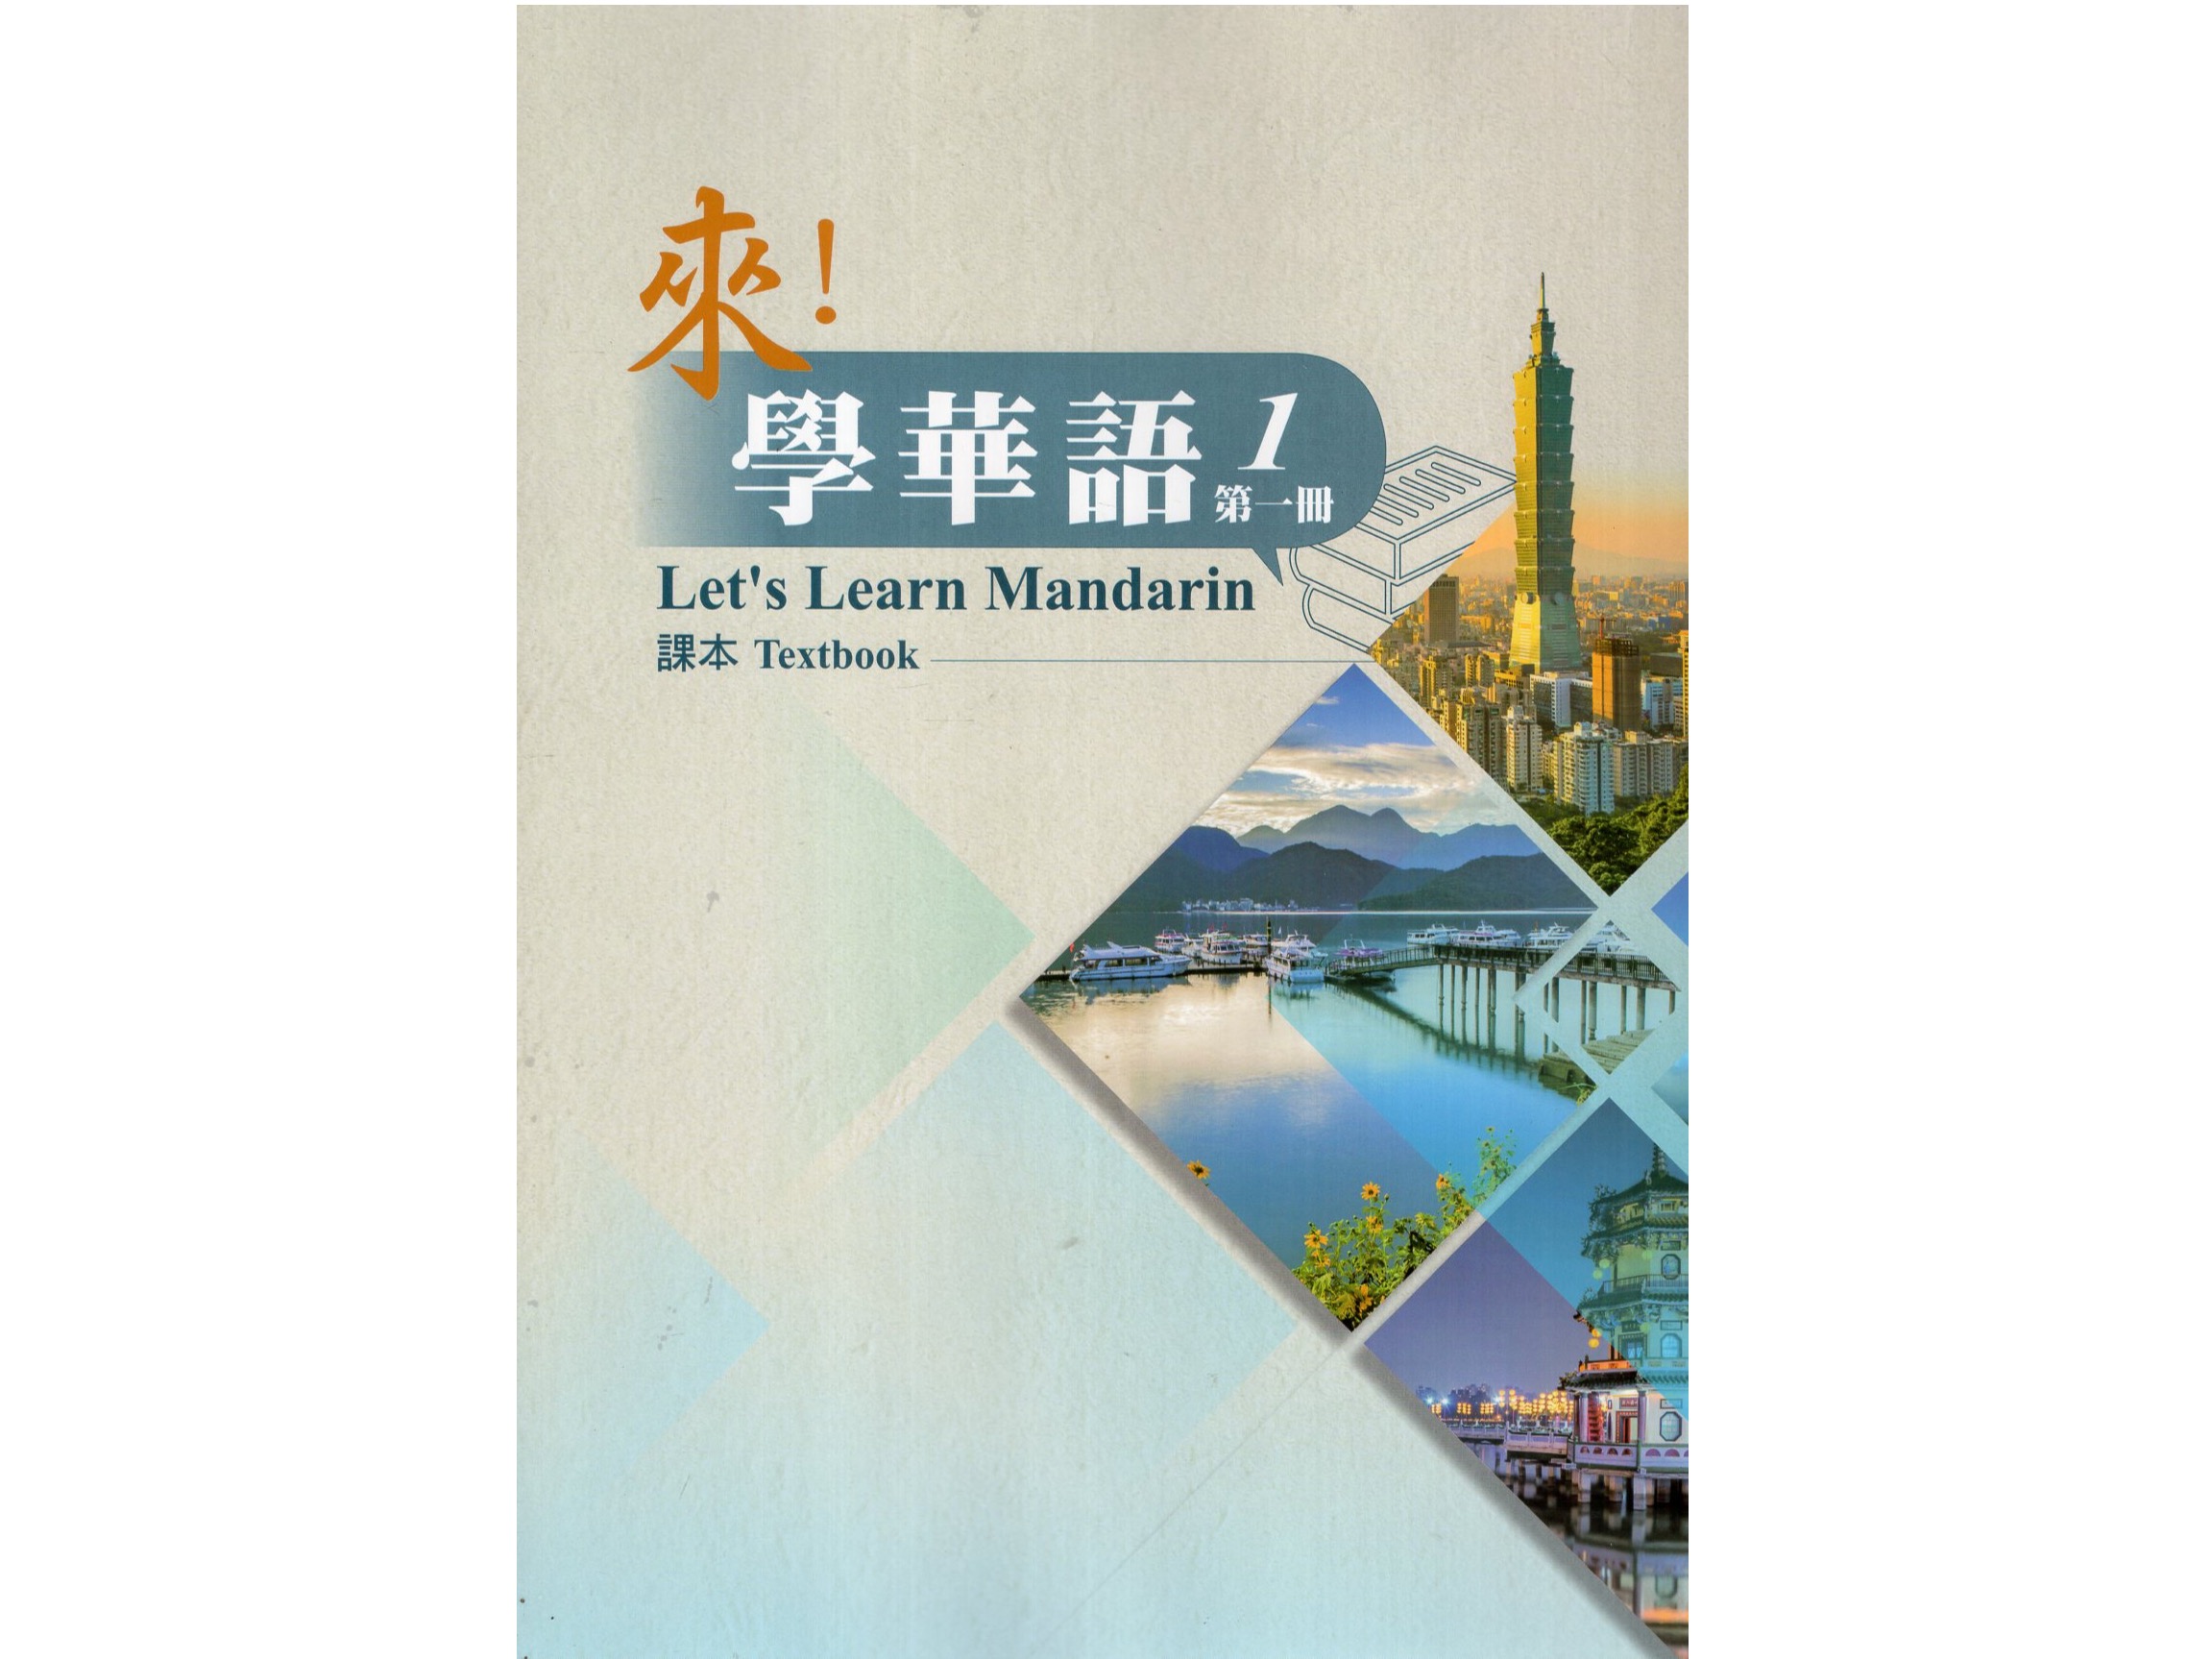 Adult Chinese Classes 成人中文課